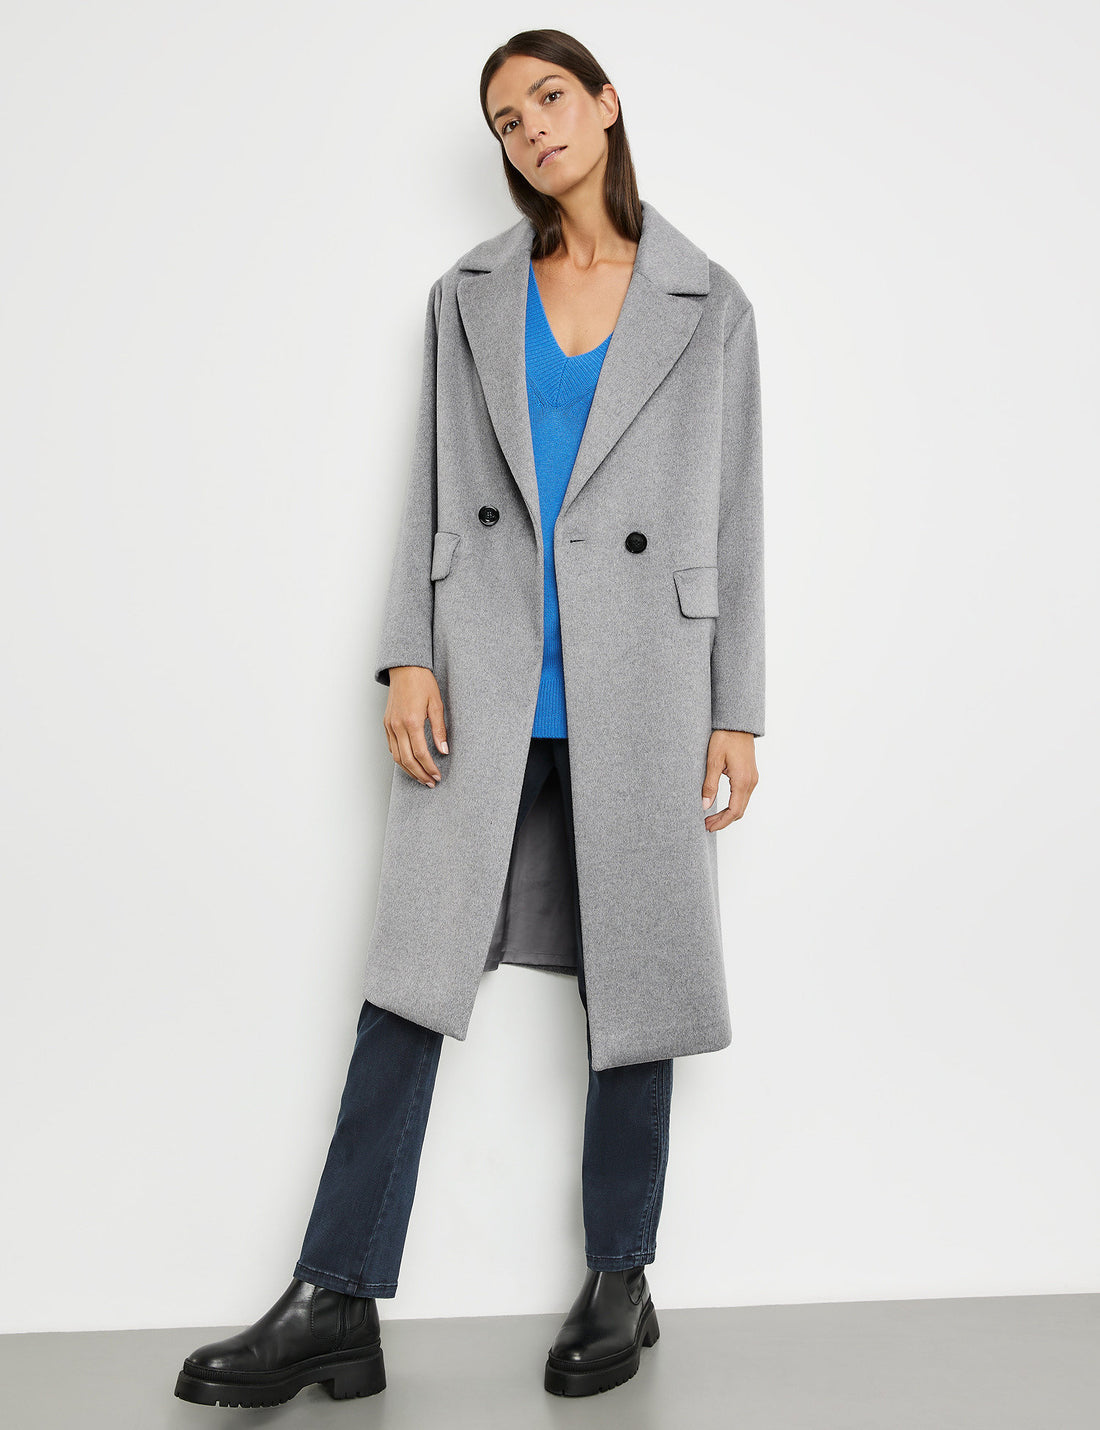 Coat In A Slightly Oversized Cut With Wool_250014-31135_20348_01